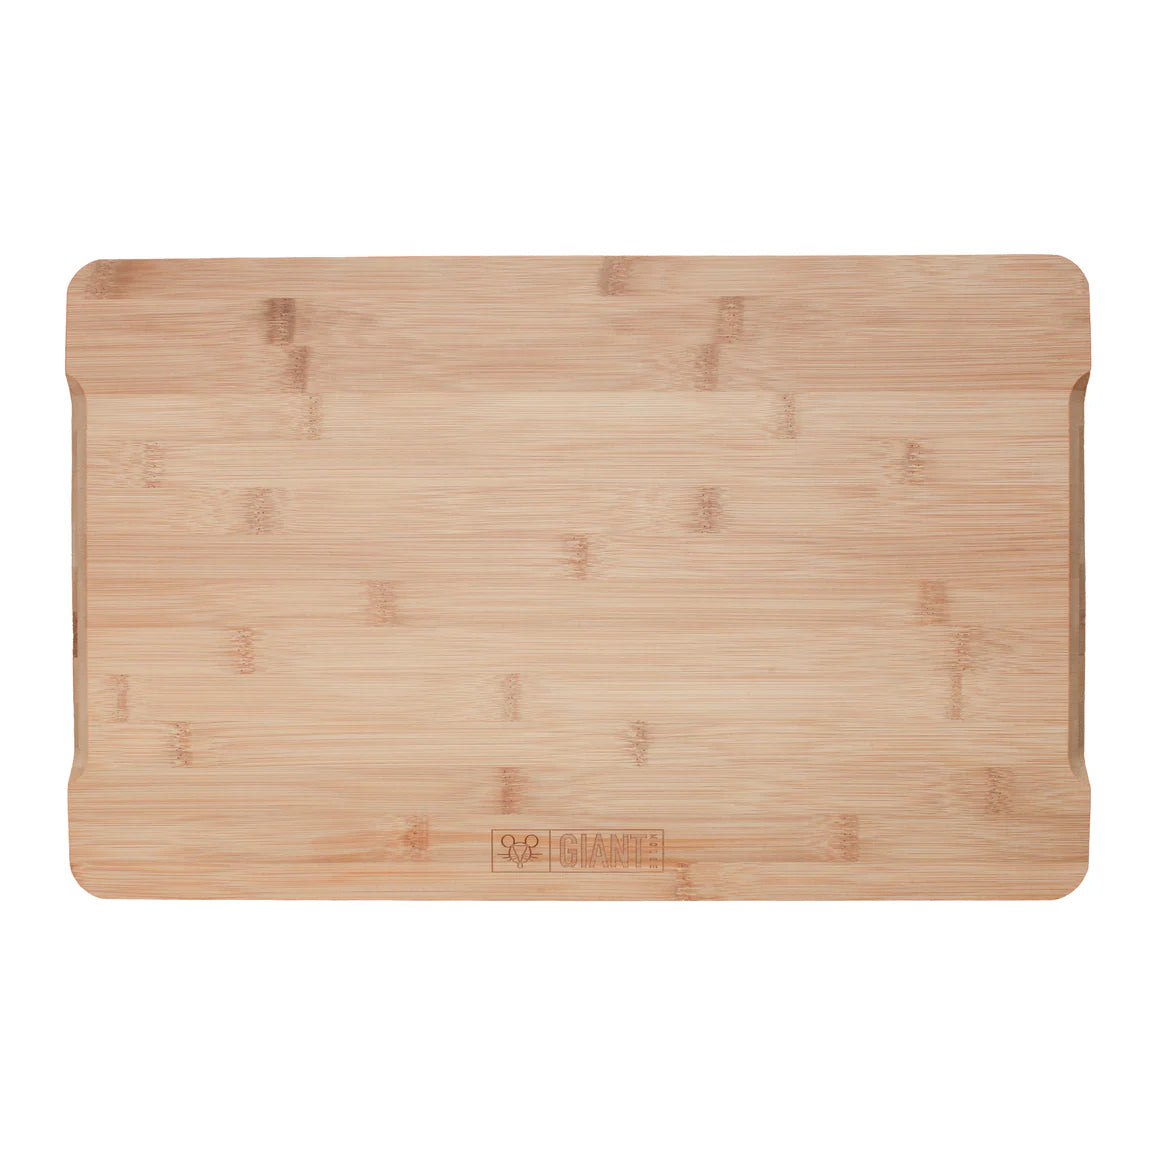 Giant Mouse Bamboo Cutting Board